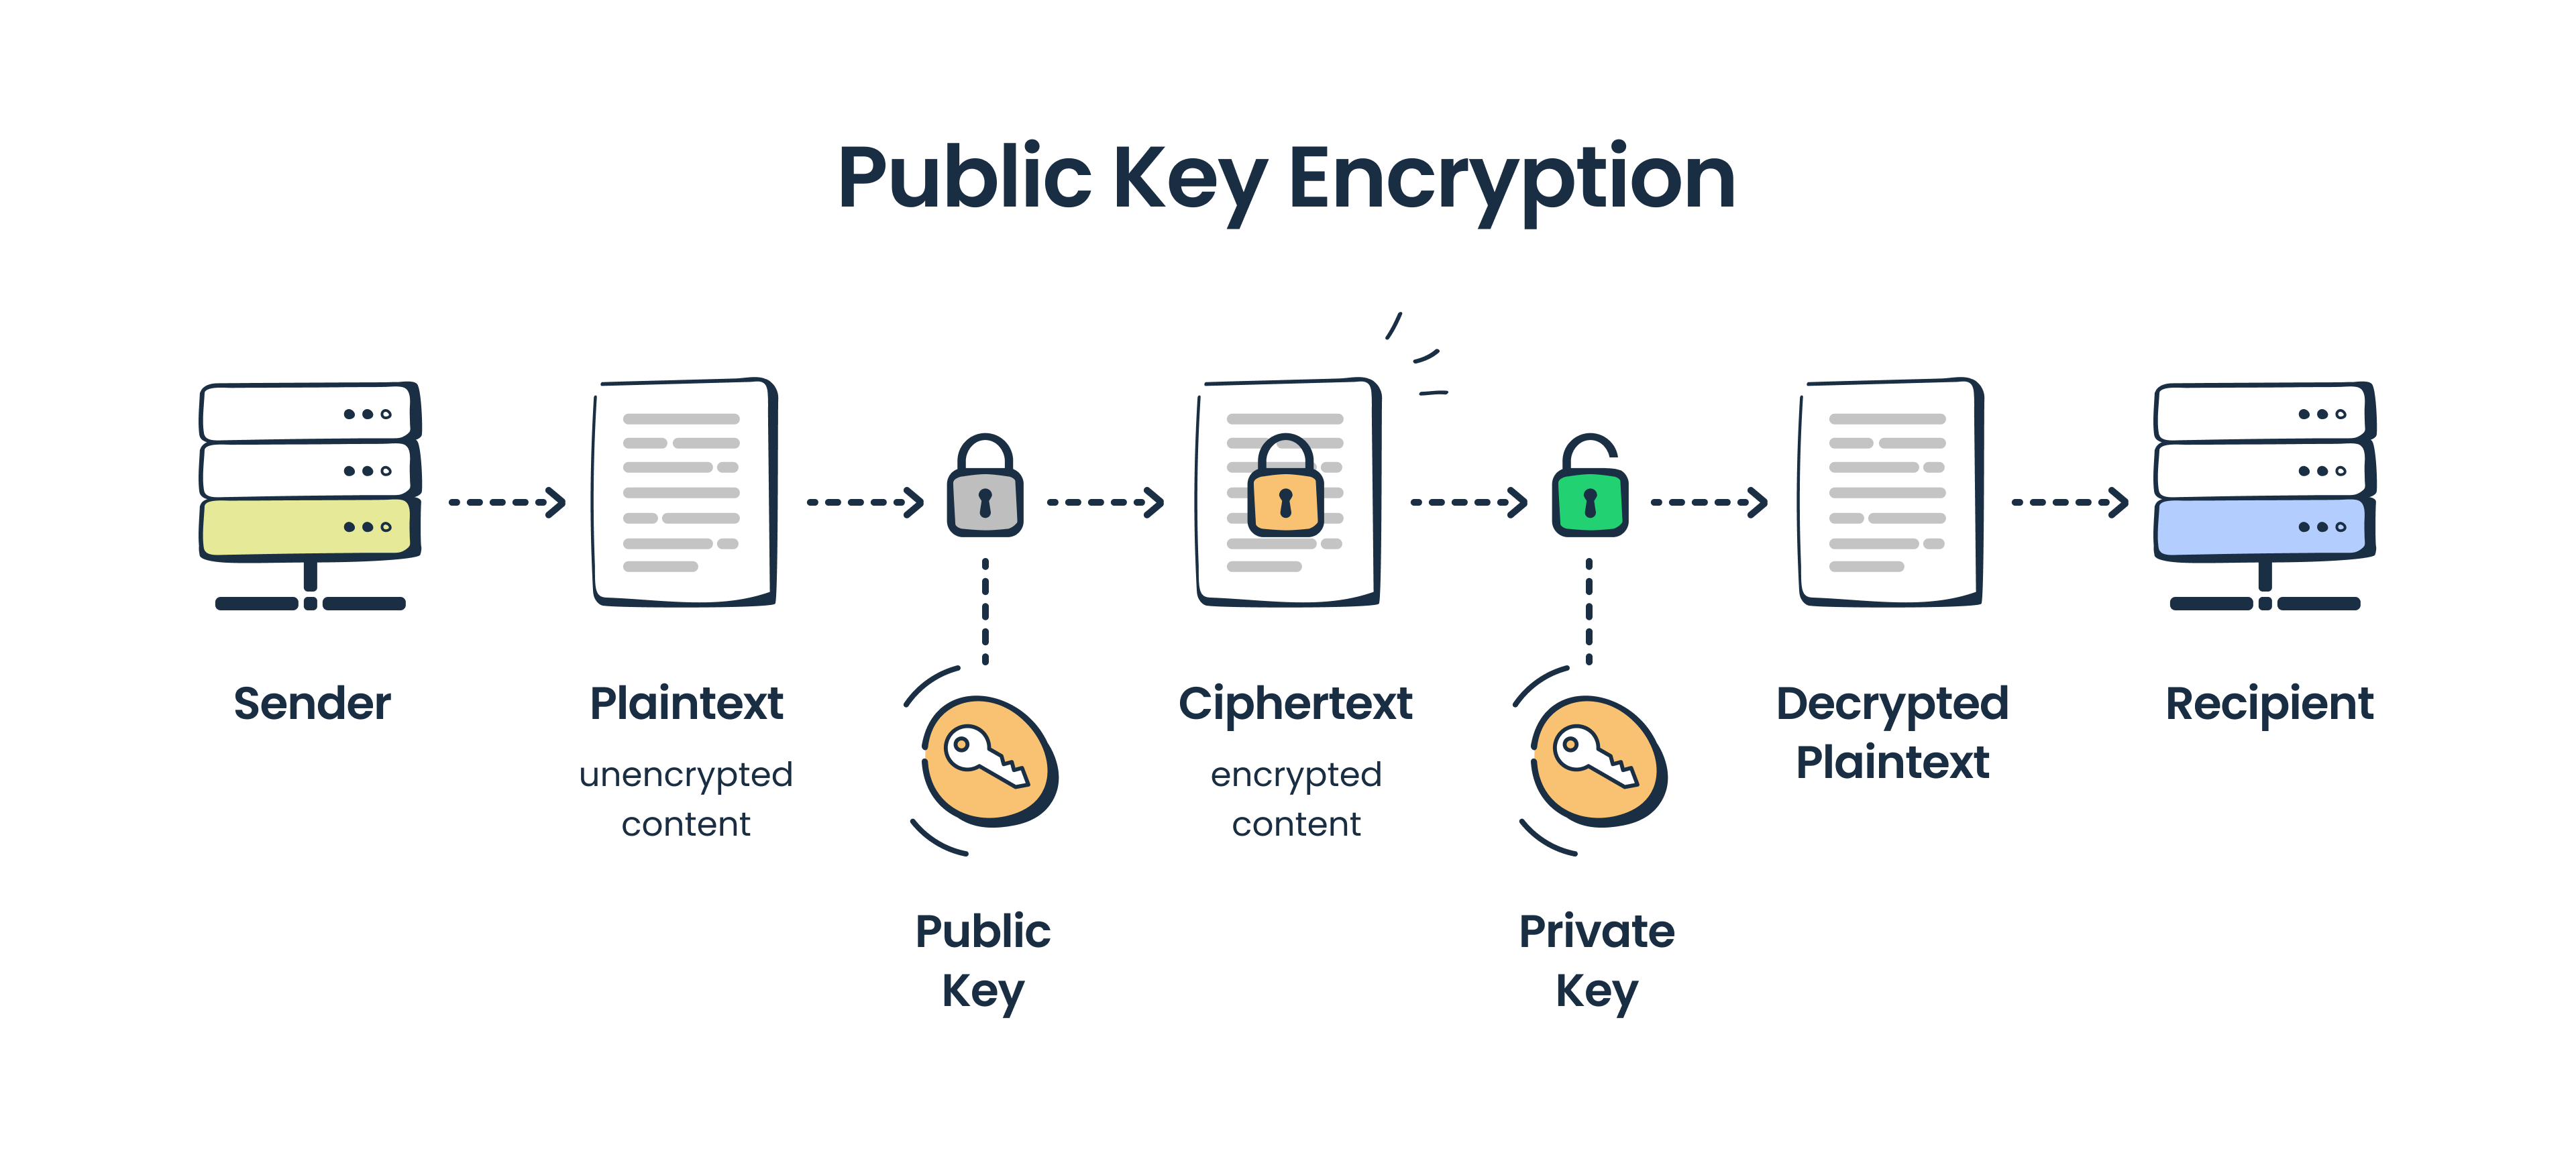 This is an image showing an illustration of public key encryption 